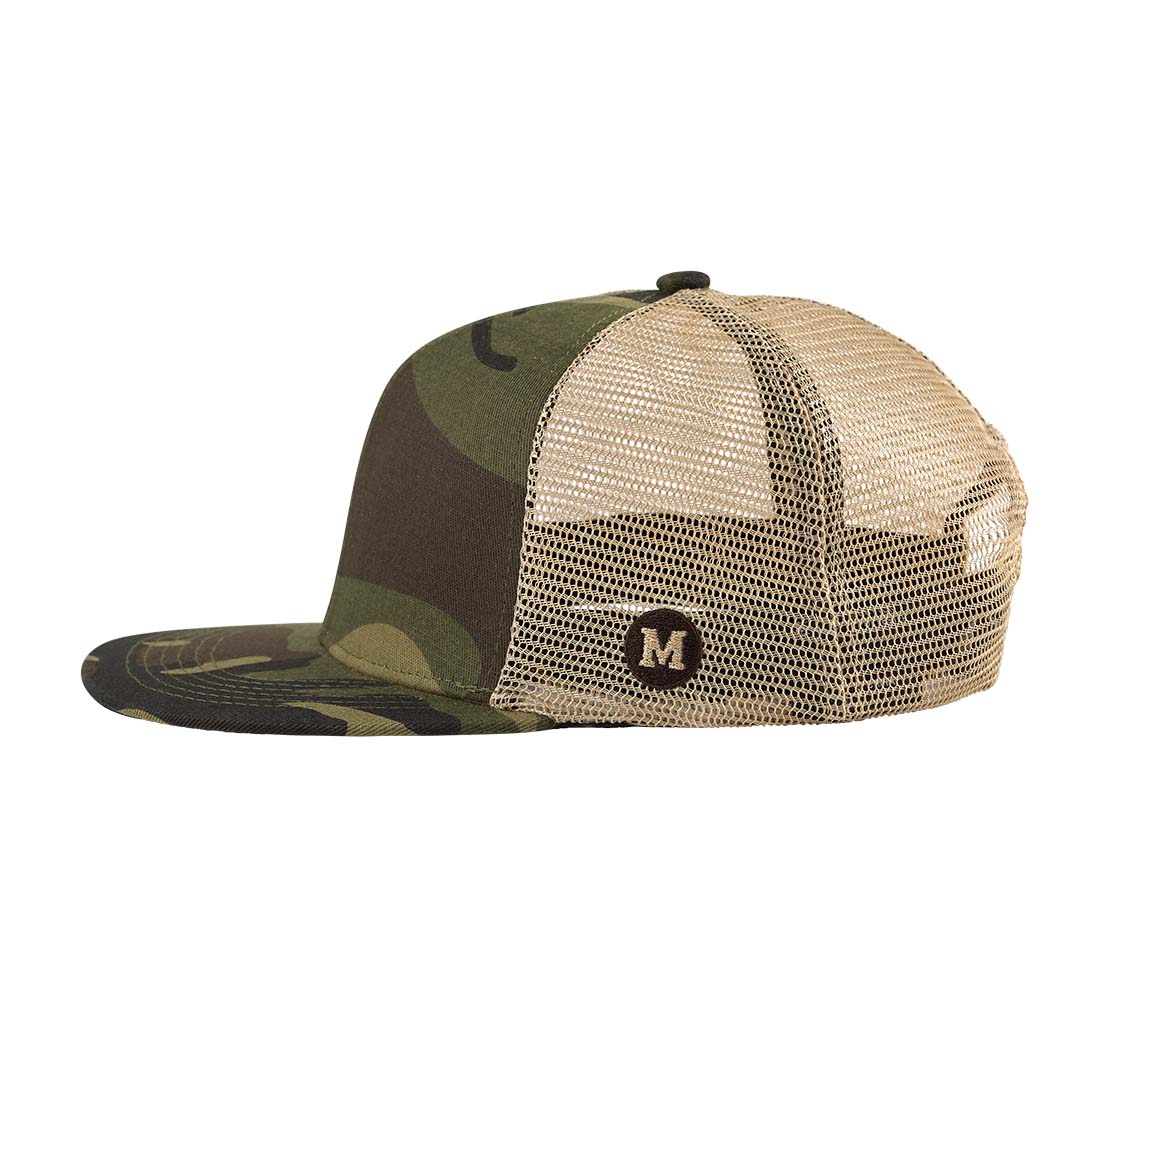 We The Essentials Camo Trucker Hat with Leather Patch